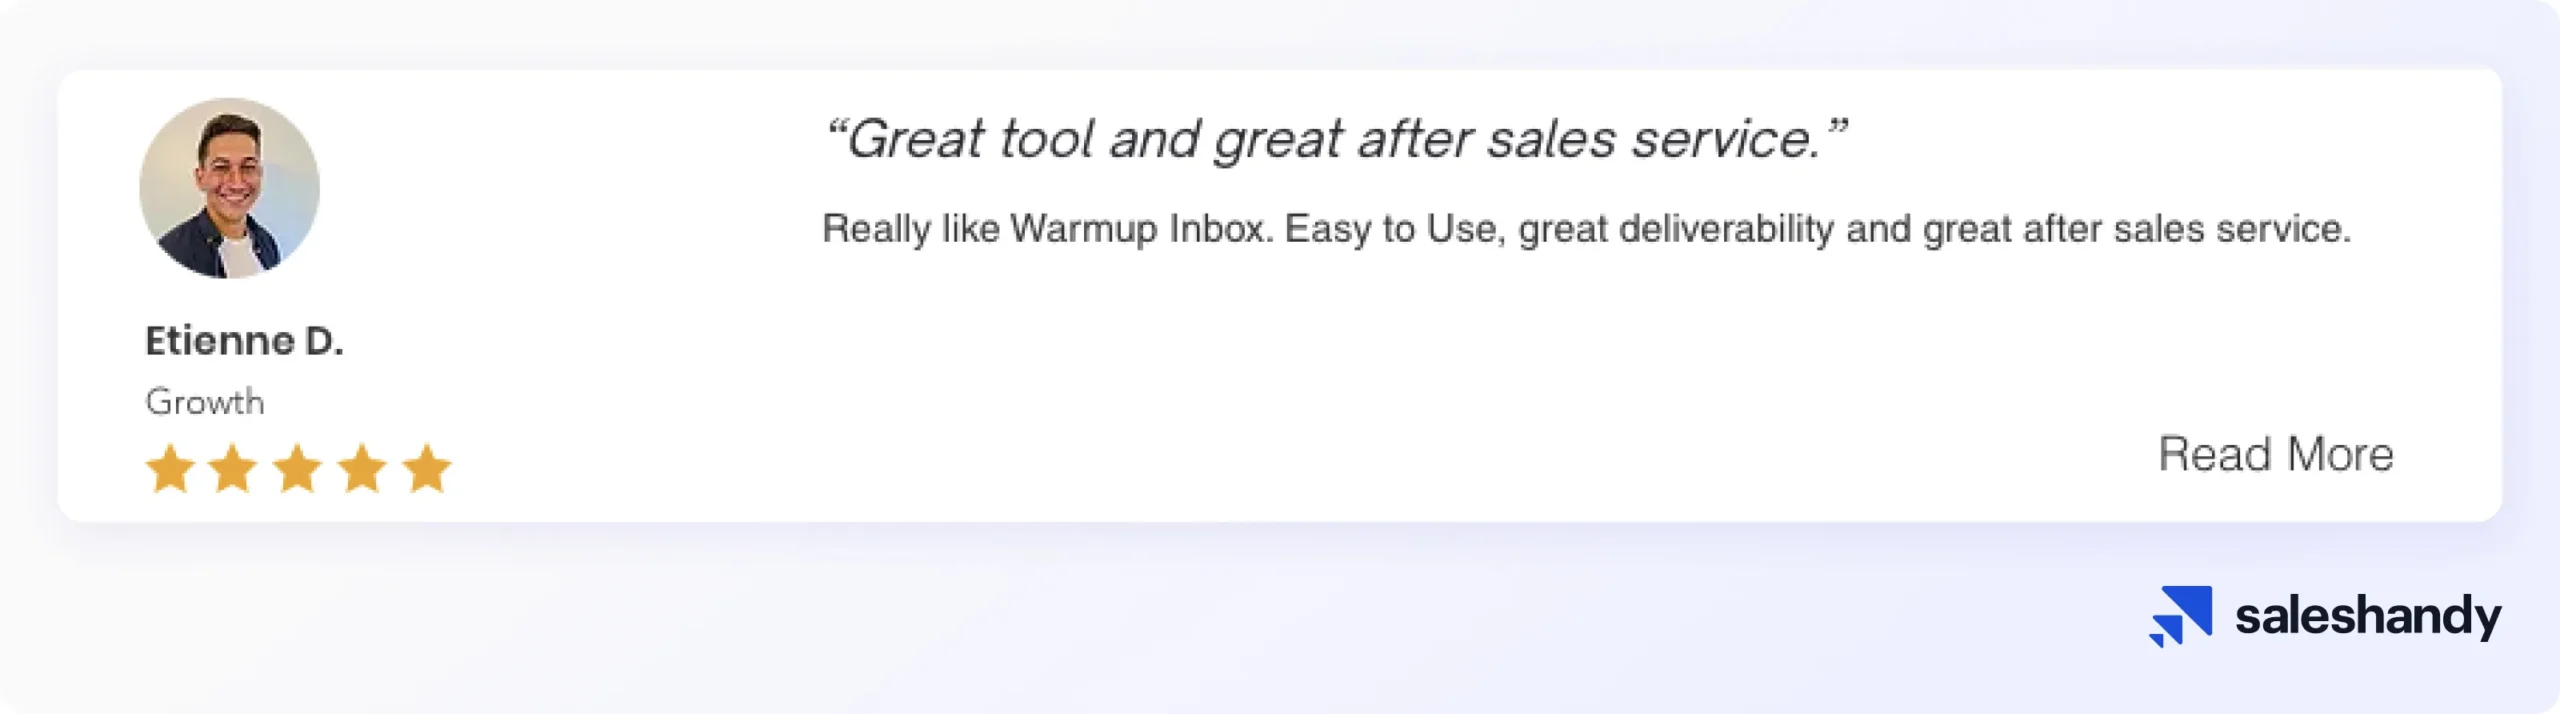 Warmup Inbox user review